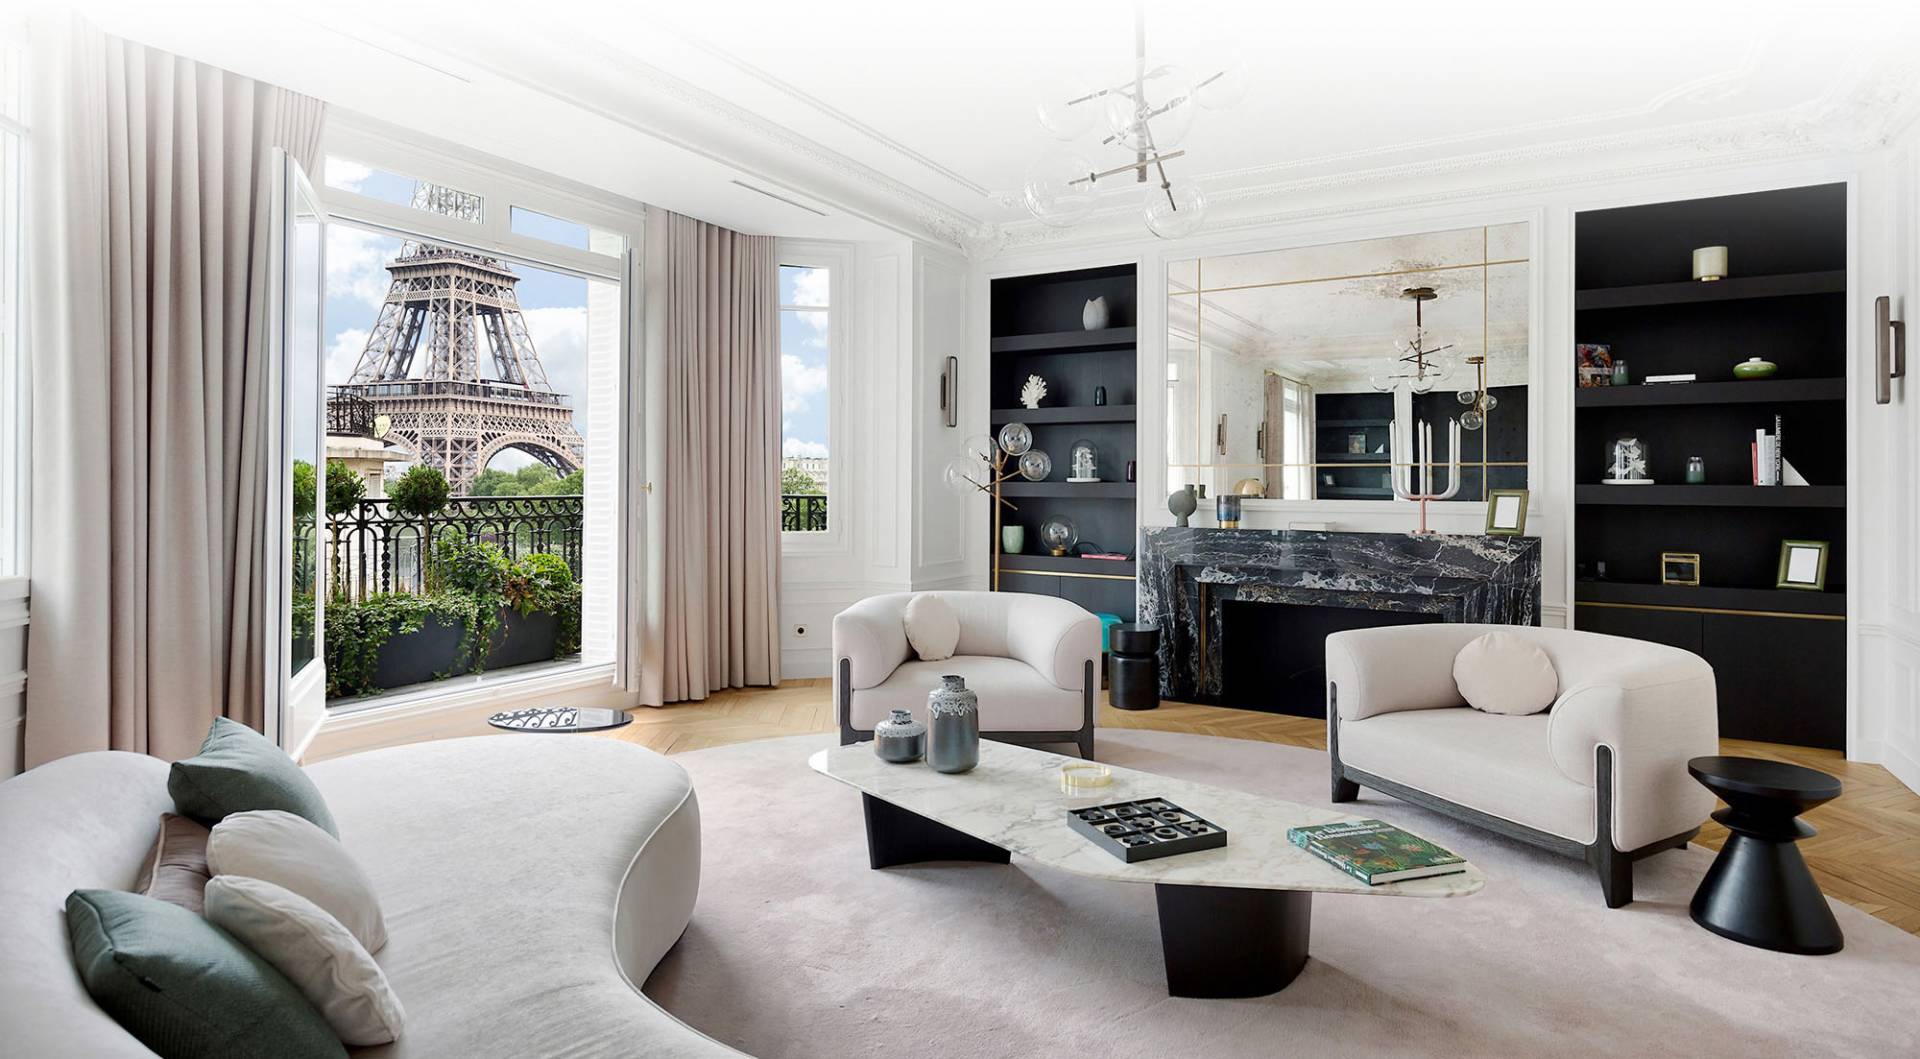 How Challenging Will It Be to Purchase an Apartment in Paris